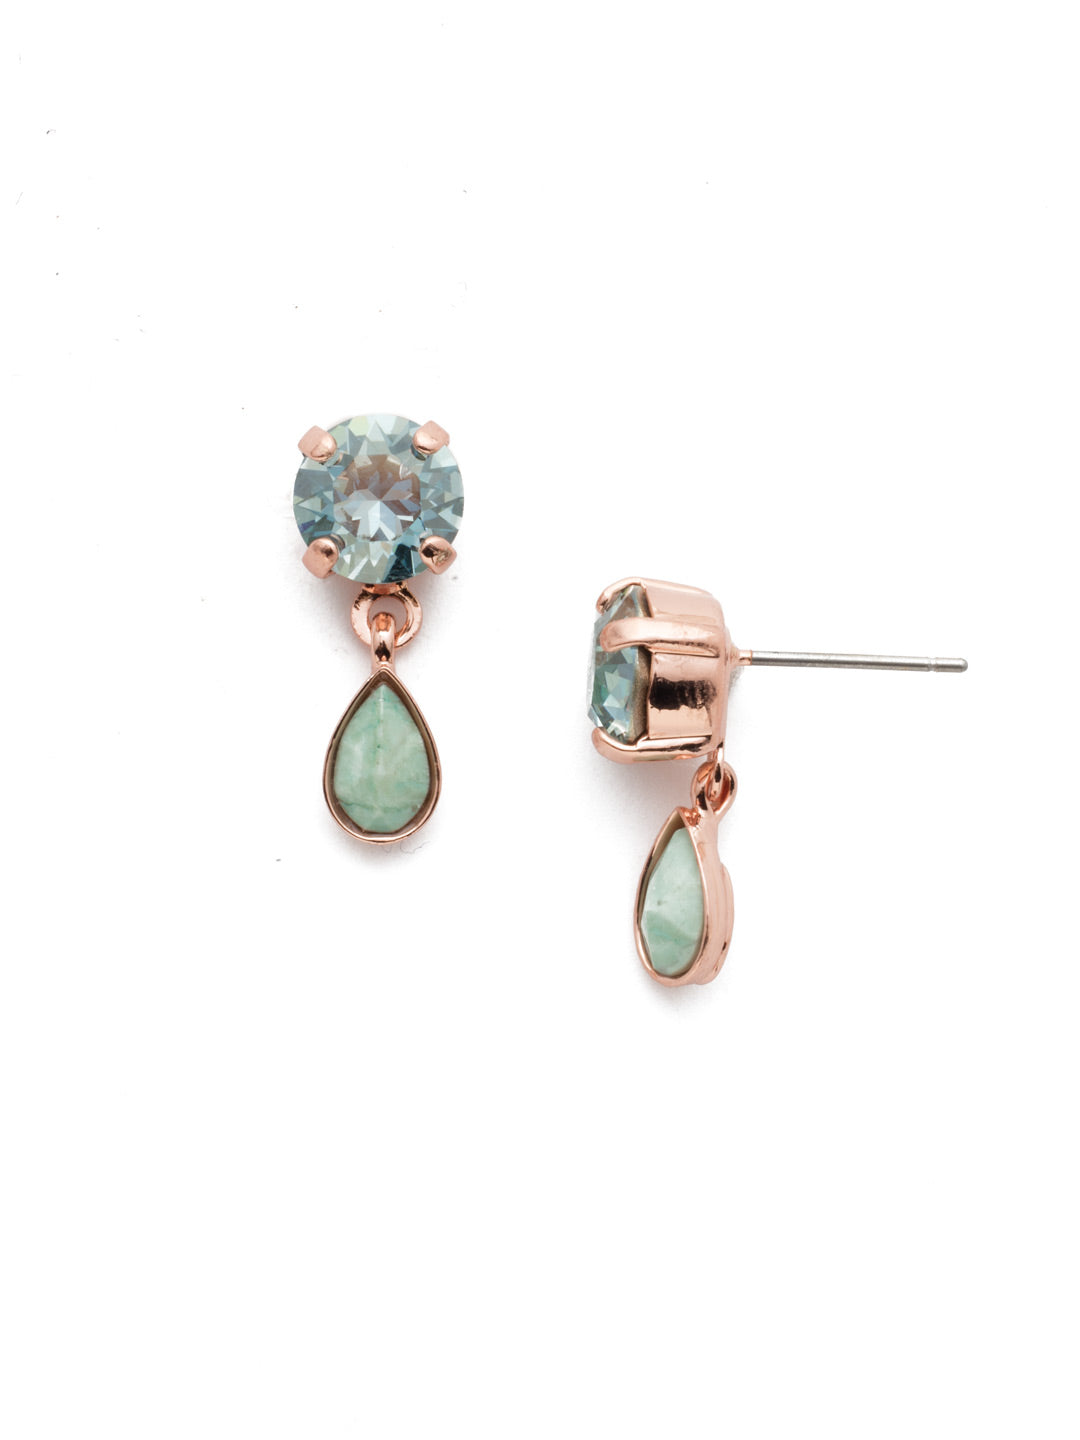 Quincey Dangle Earrings - EET160RGCAZ - The Quincey Dangle Earrings are simply sophisticated. The signature round crystal posts are taken up a notch when they drip a pear-shaped stone. From Sorrelli's Crystal Azure collection in our Rose Gold-tone finish.